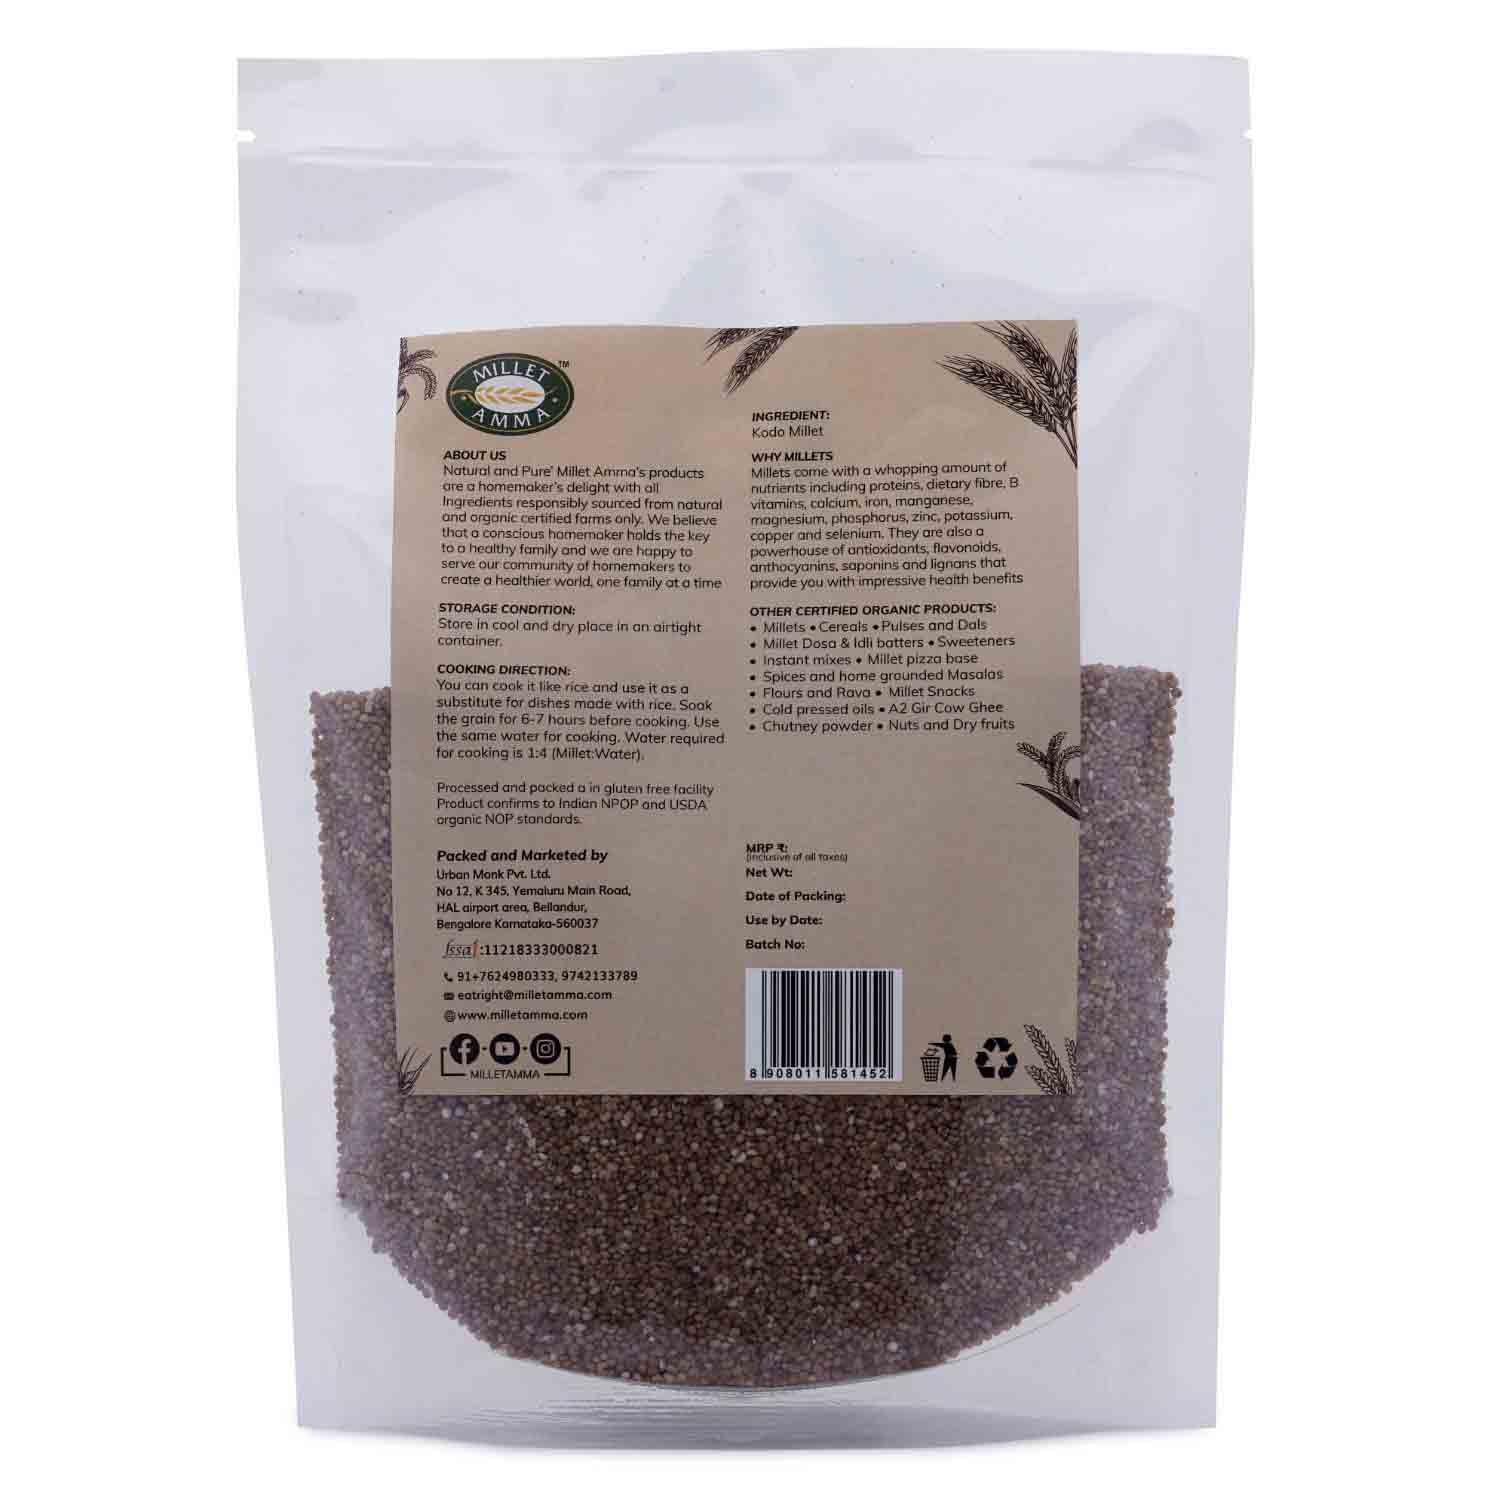 Millet Amma’s Organic Kodo Millet- Millet Amma’s Organic Kodo Millets are a rich source of Vitamin B.  These unpolished Kodo Millets are loaded with antioxidants that aid in weight management and in regulating your glucose and cholesterol levels.  You can make a variety of gluten free dishes with Kodo Millet like pulao, pongal, khichdi, salads, stir-fry and so much more.